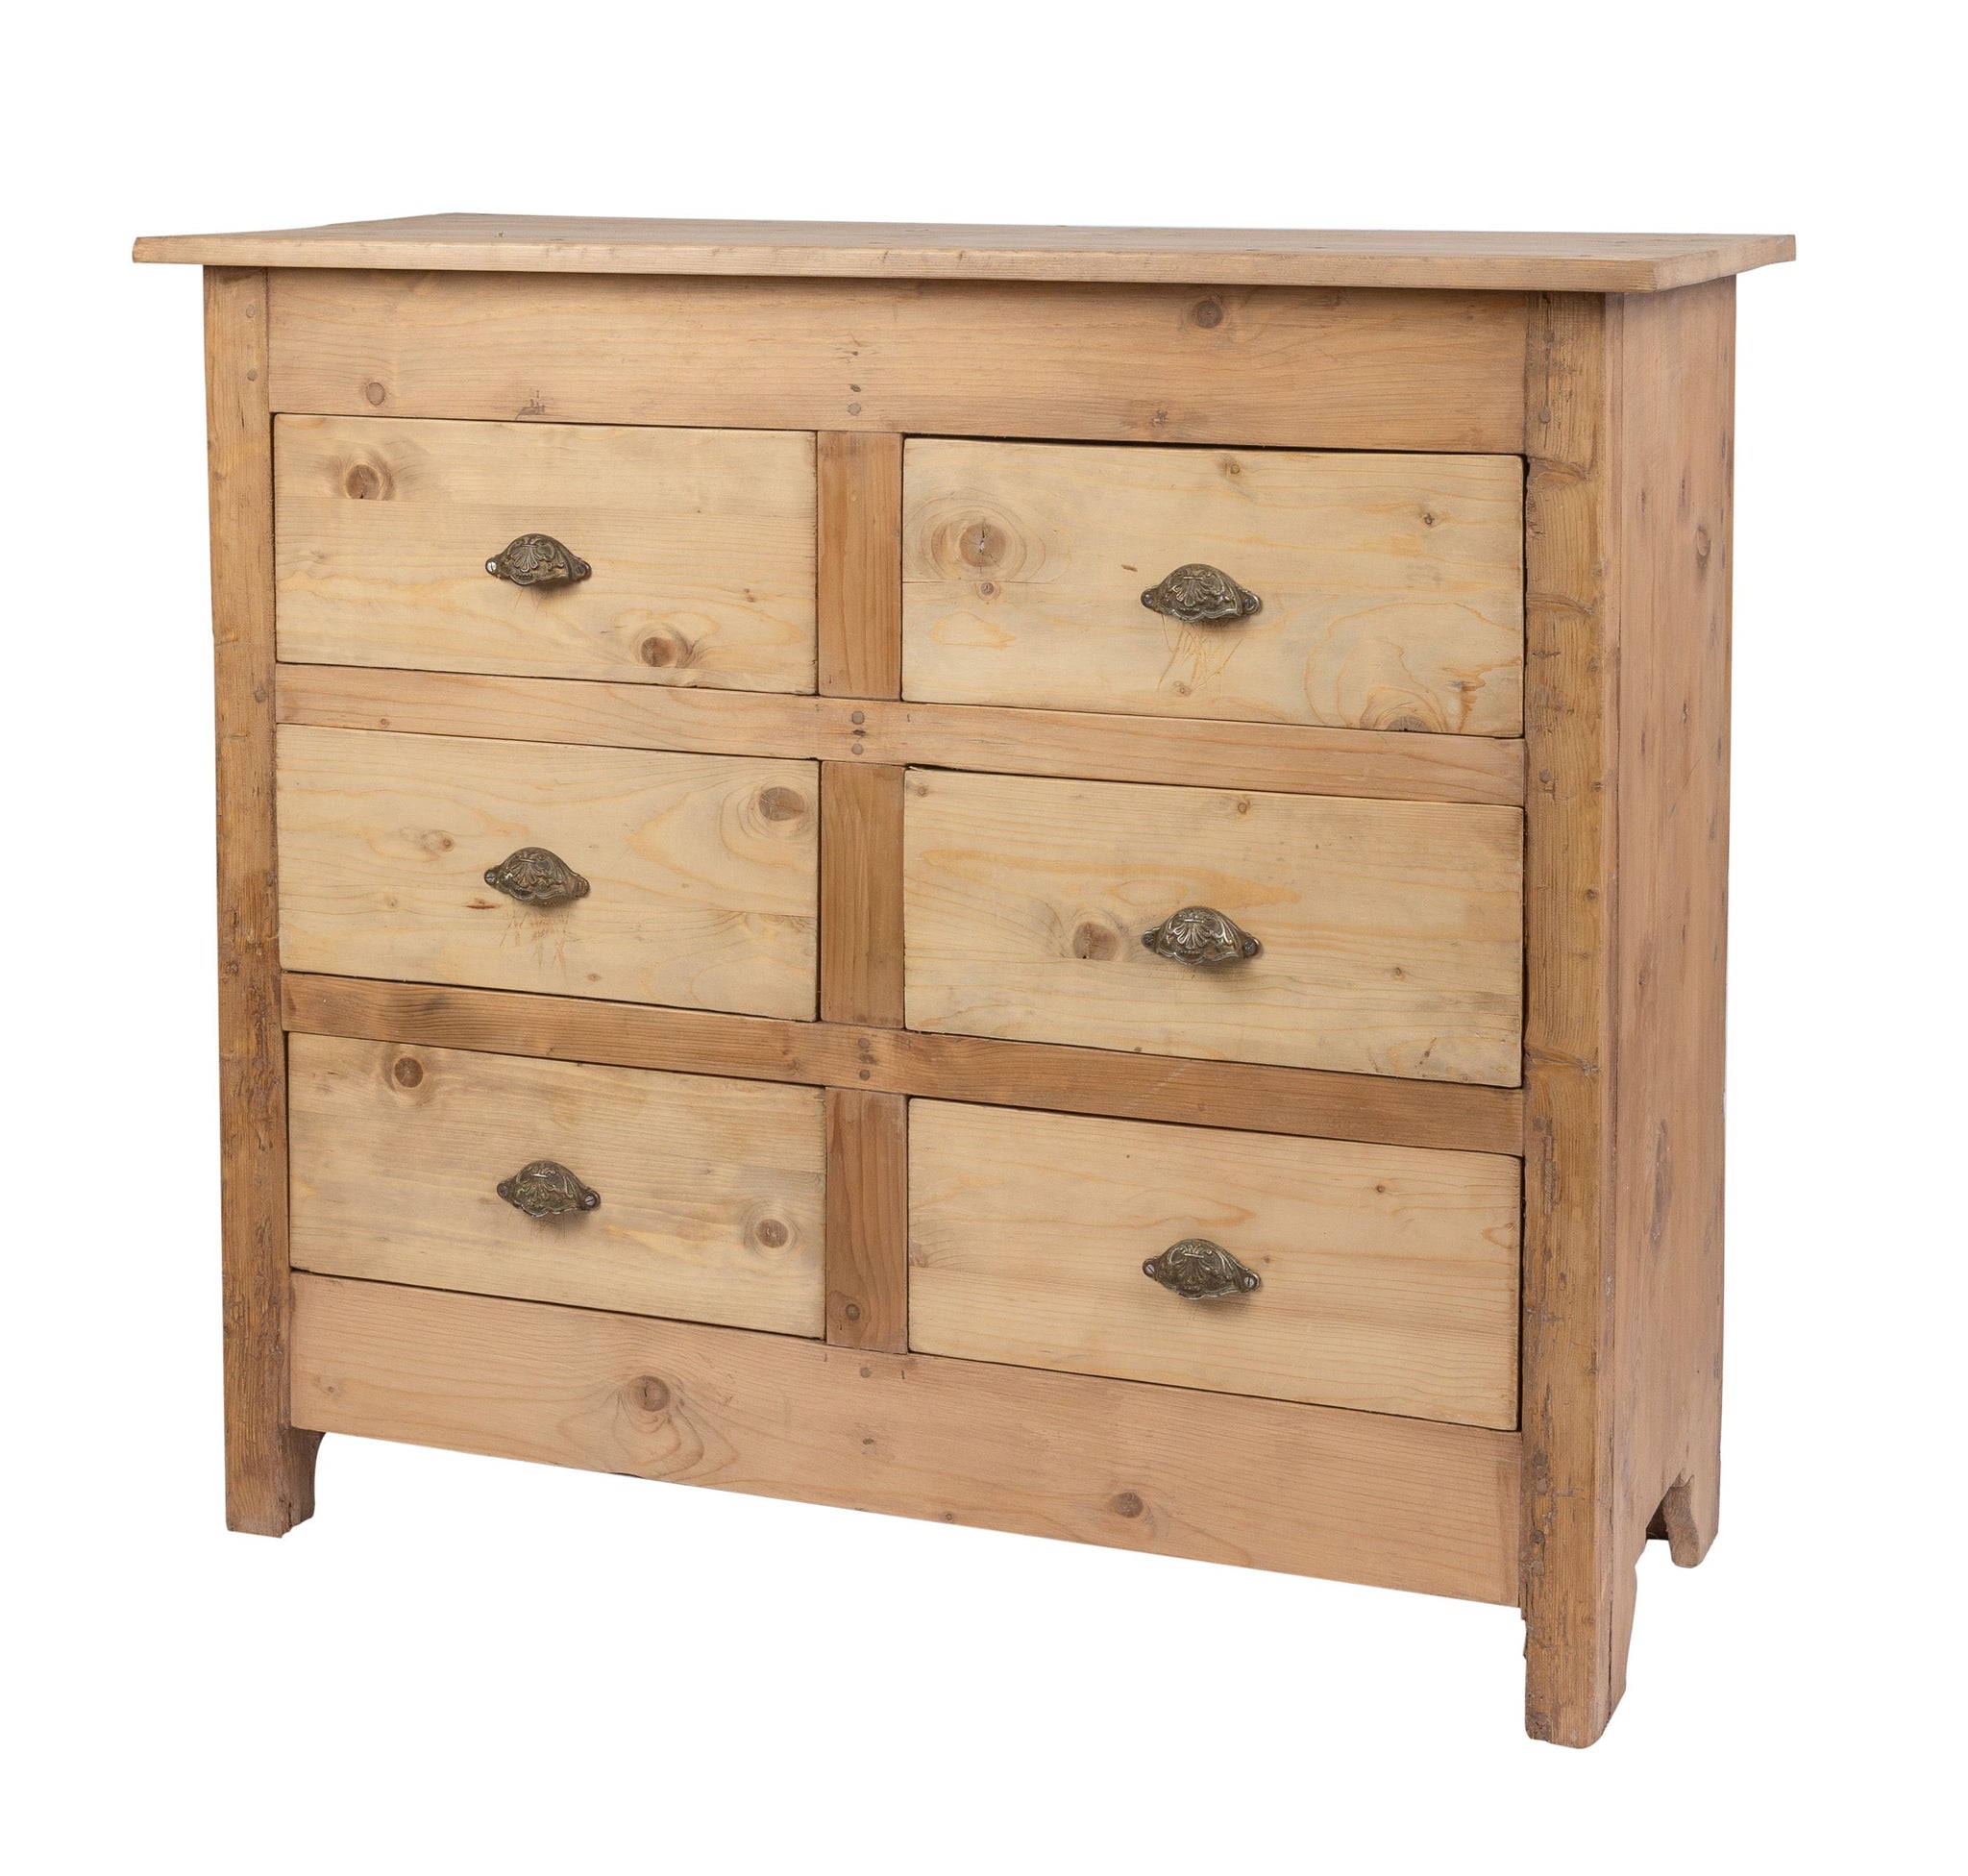 A incredible set of 20th century Antique French pine drawers from the Haute Savoie region of France